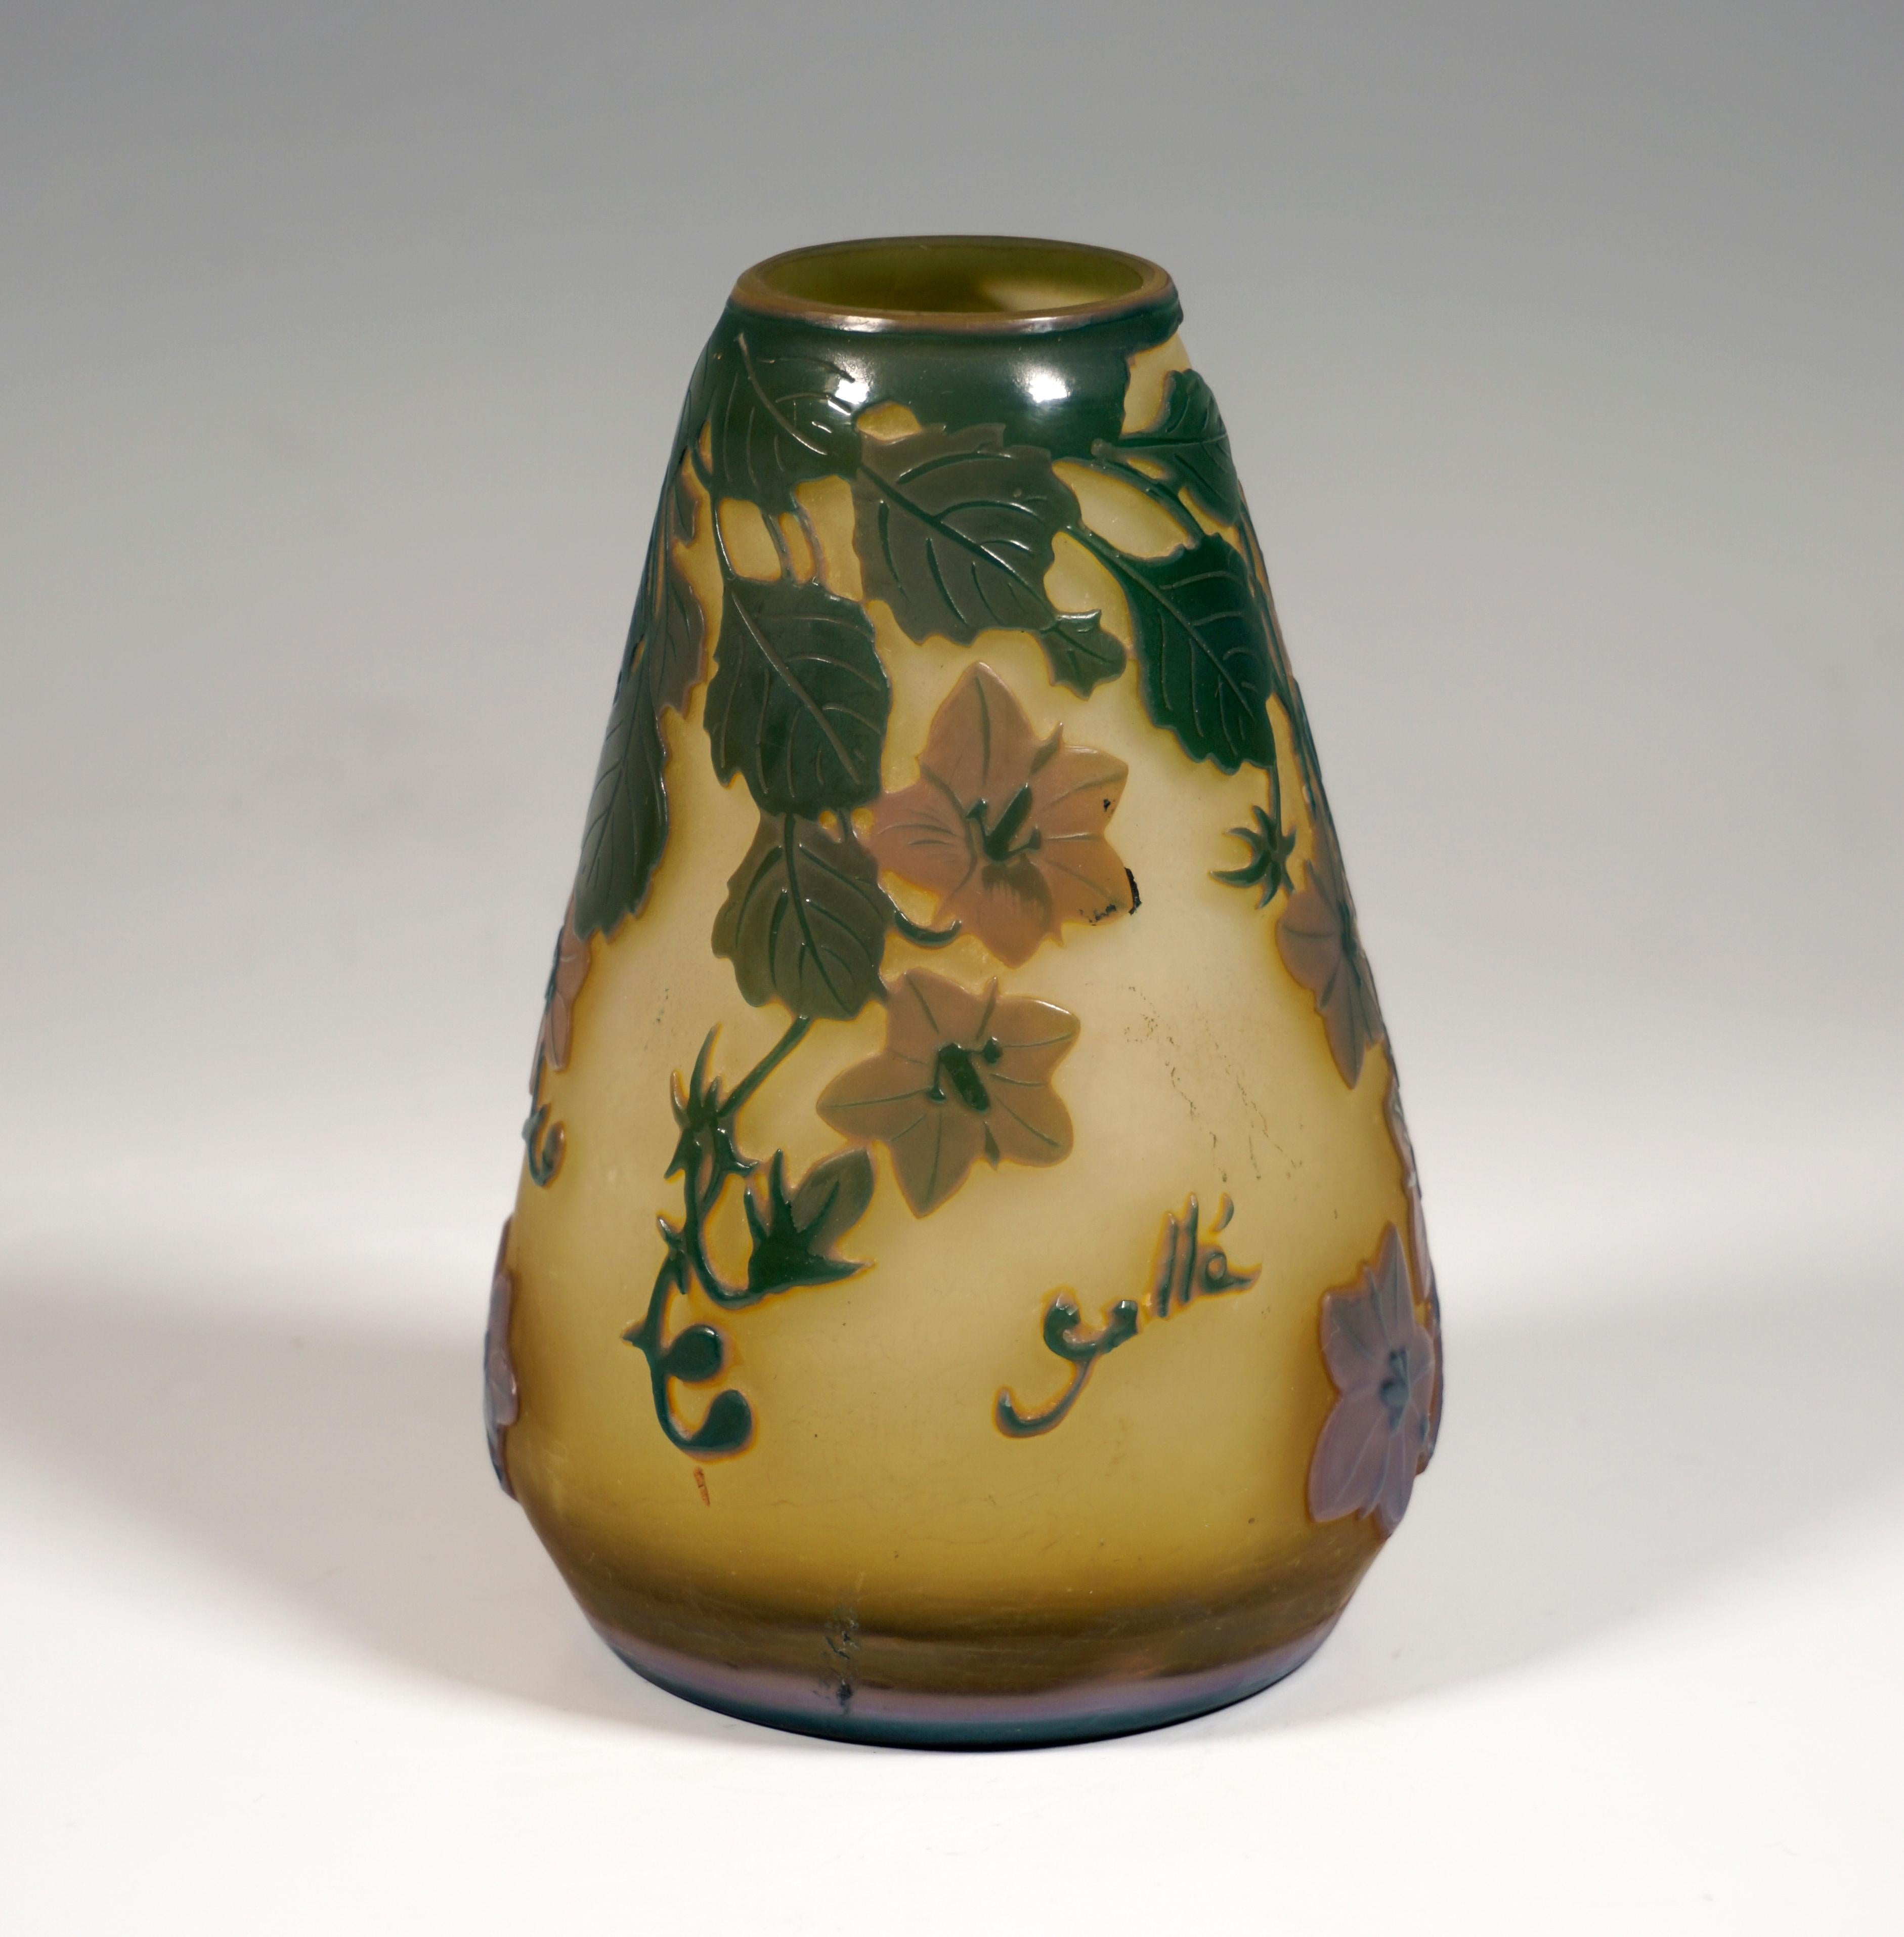 Vase in a exceptional conical shape, colorless glass with yellow colored powder inclusions, overlays in lilac and green, in various stages highly etched decoration with clematis blossoms and leaves, etched matt on the inside and background on the